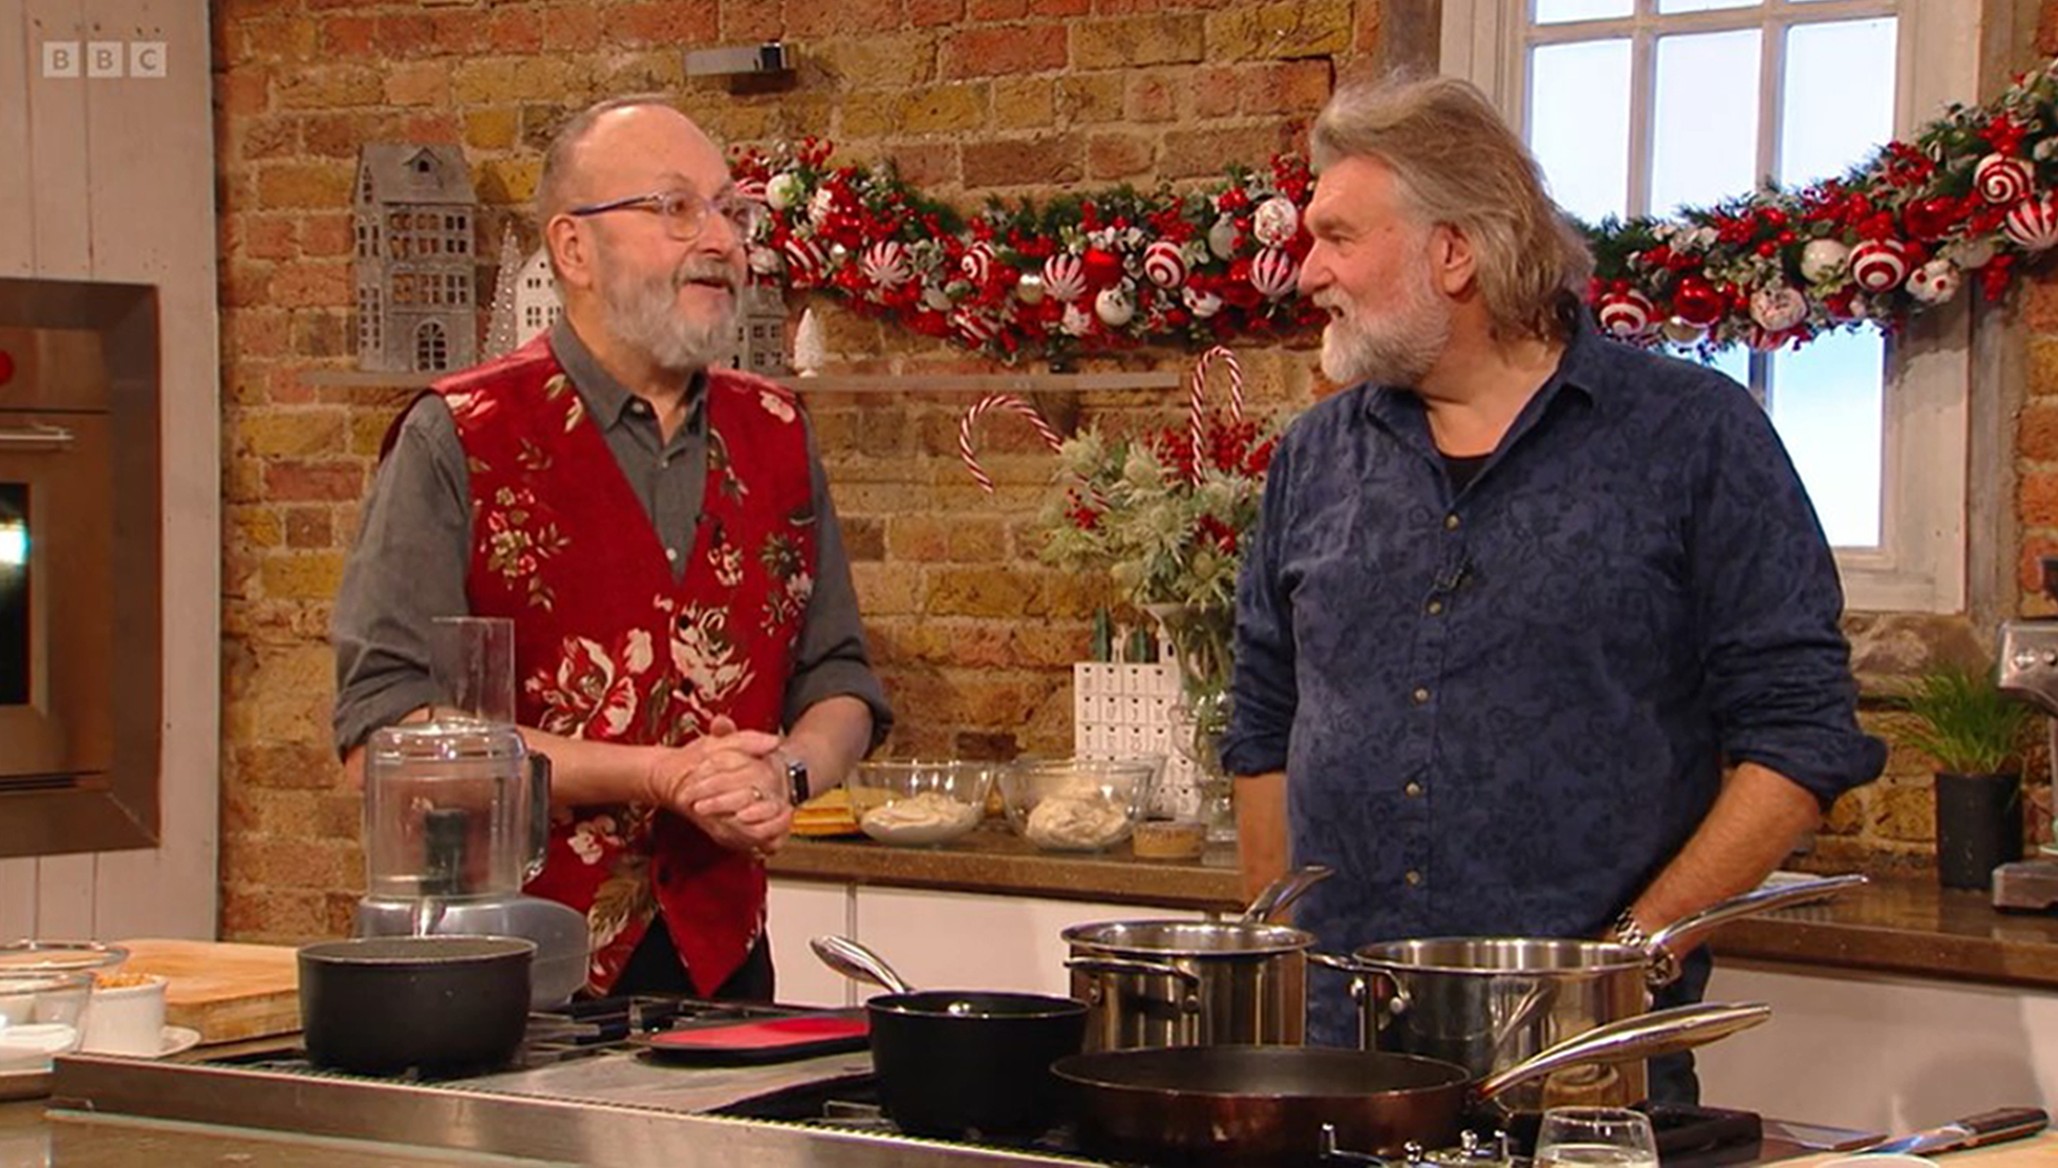 Hairy Bikers Dave Myers and Si King on BBC1's Saturday Kitchen 